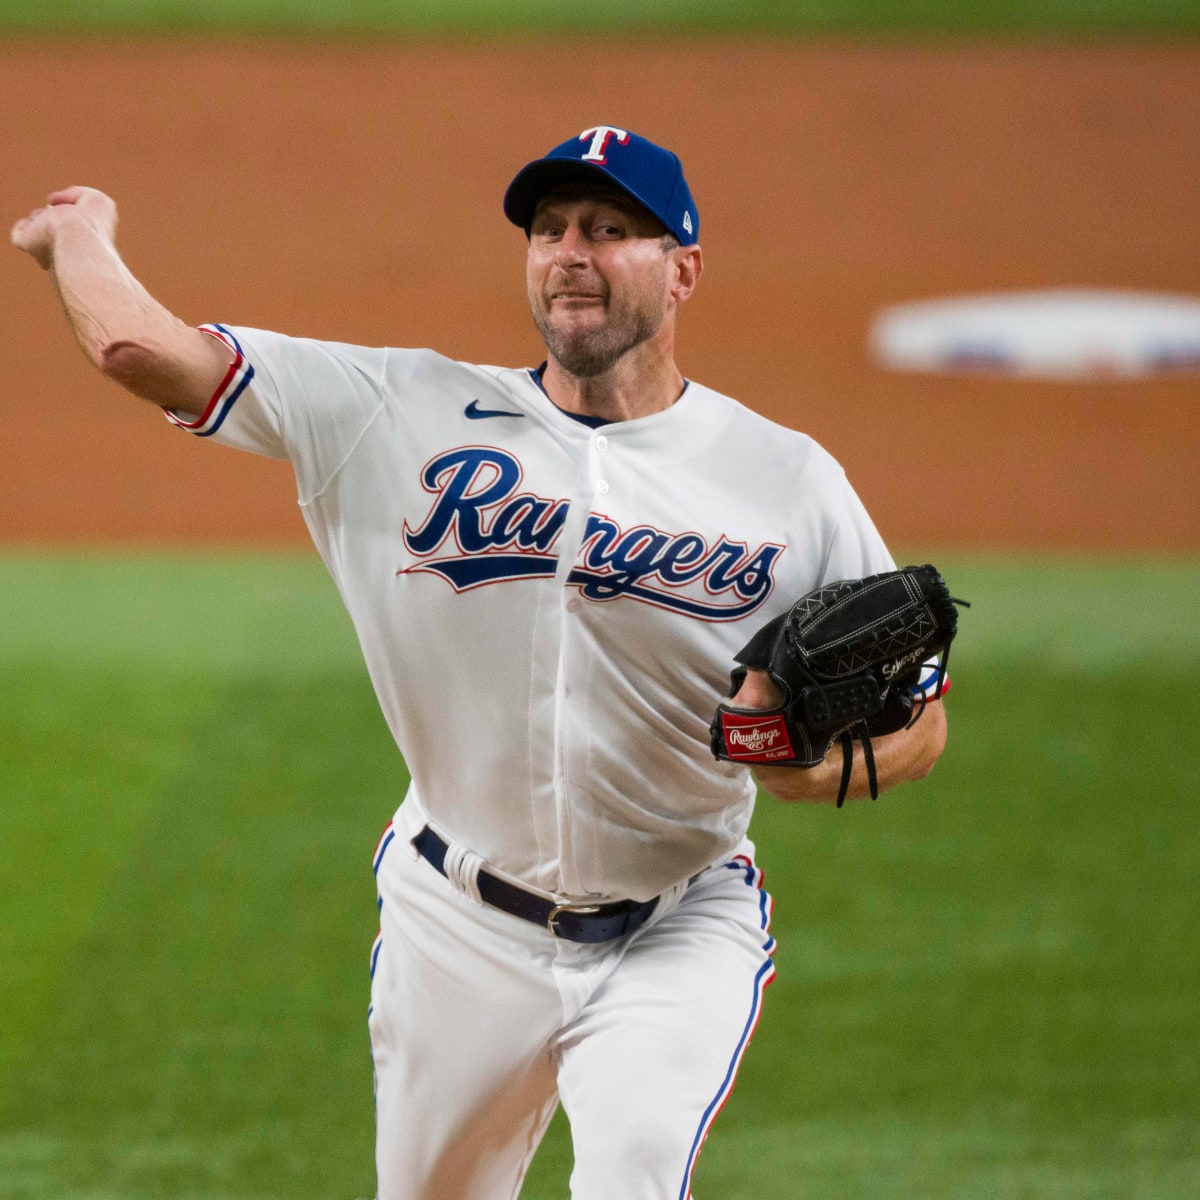 Scherzer gets erratic after milestone K and Brewers beat Rangers 6-2 for  3-game sweep - The San Diego Union-Tribune